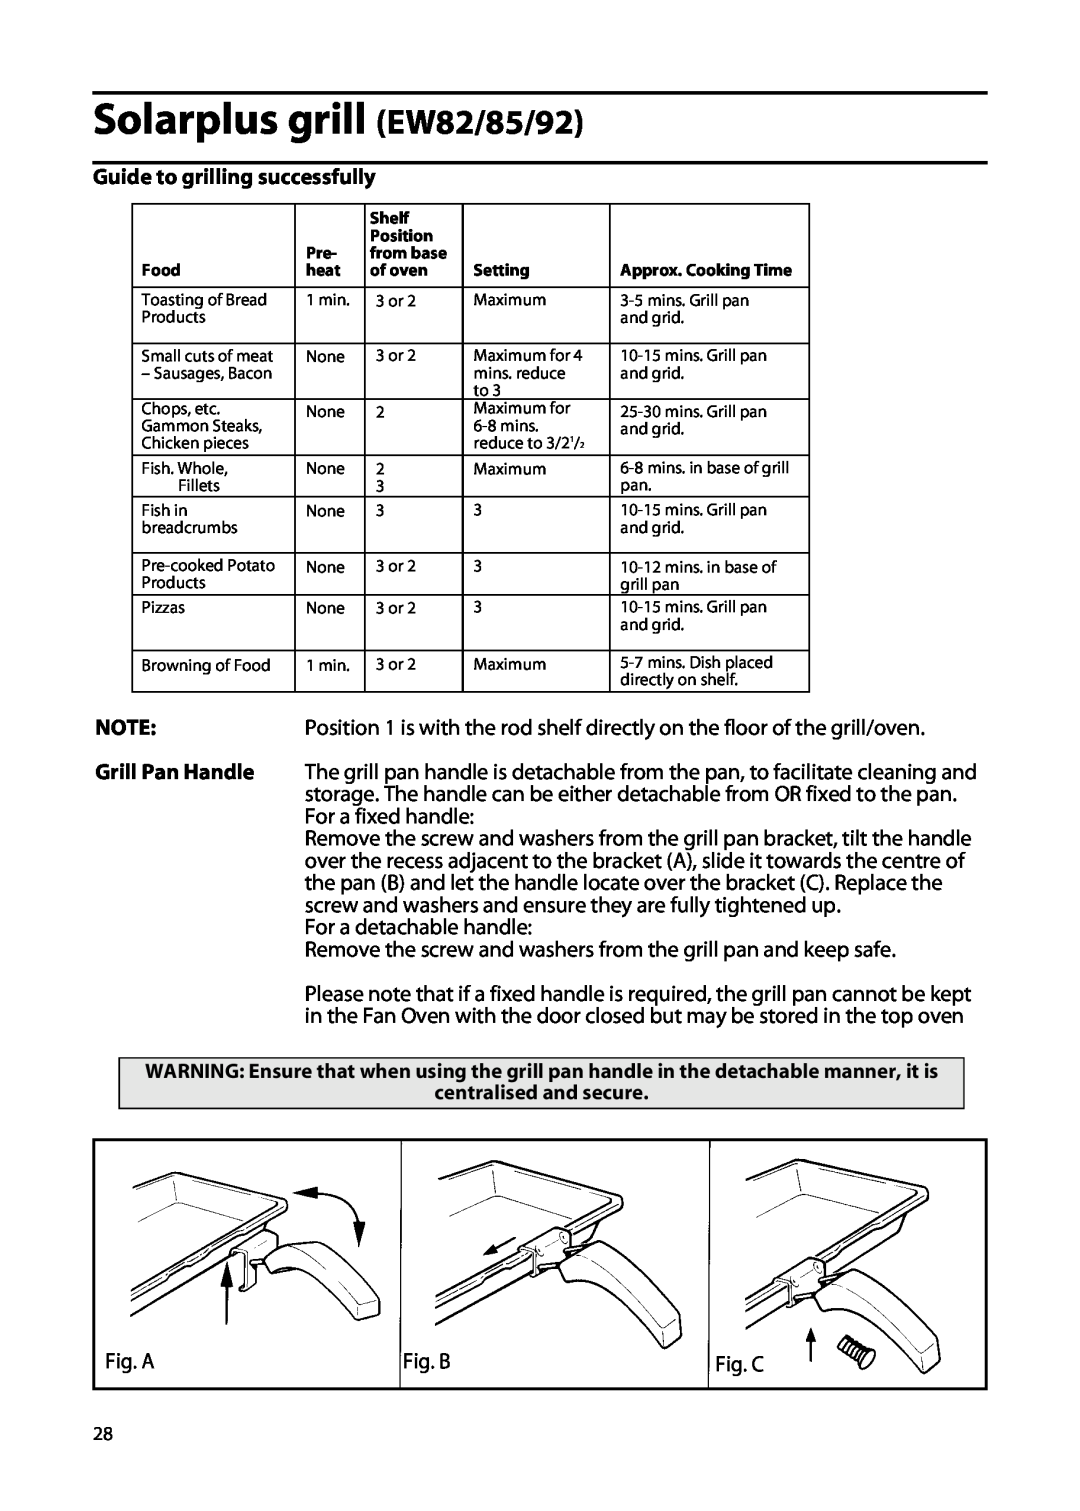 Hotpoint EW85 Solarplus grill EW82/85/92, Guide to grilling successfully, For a detachable handle, Fig. A, Fig. B, Fig. C 